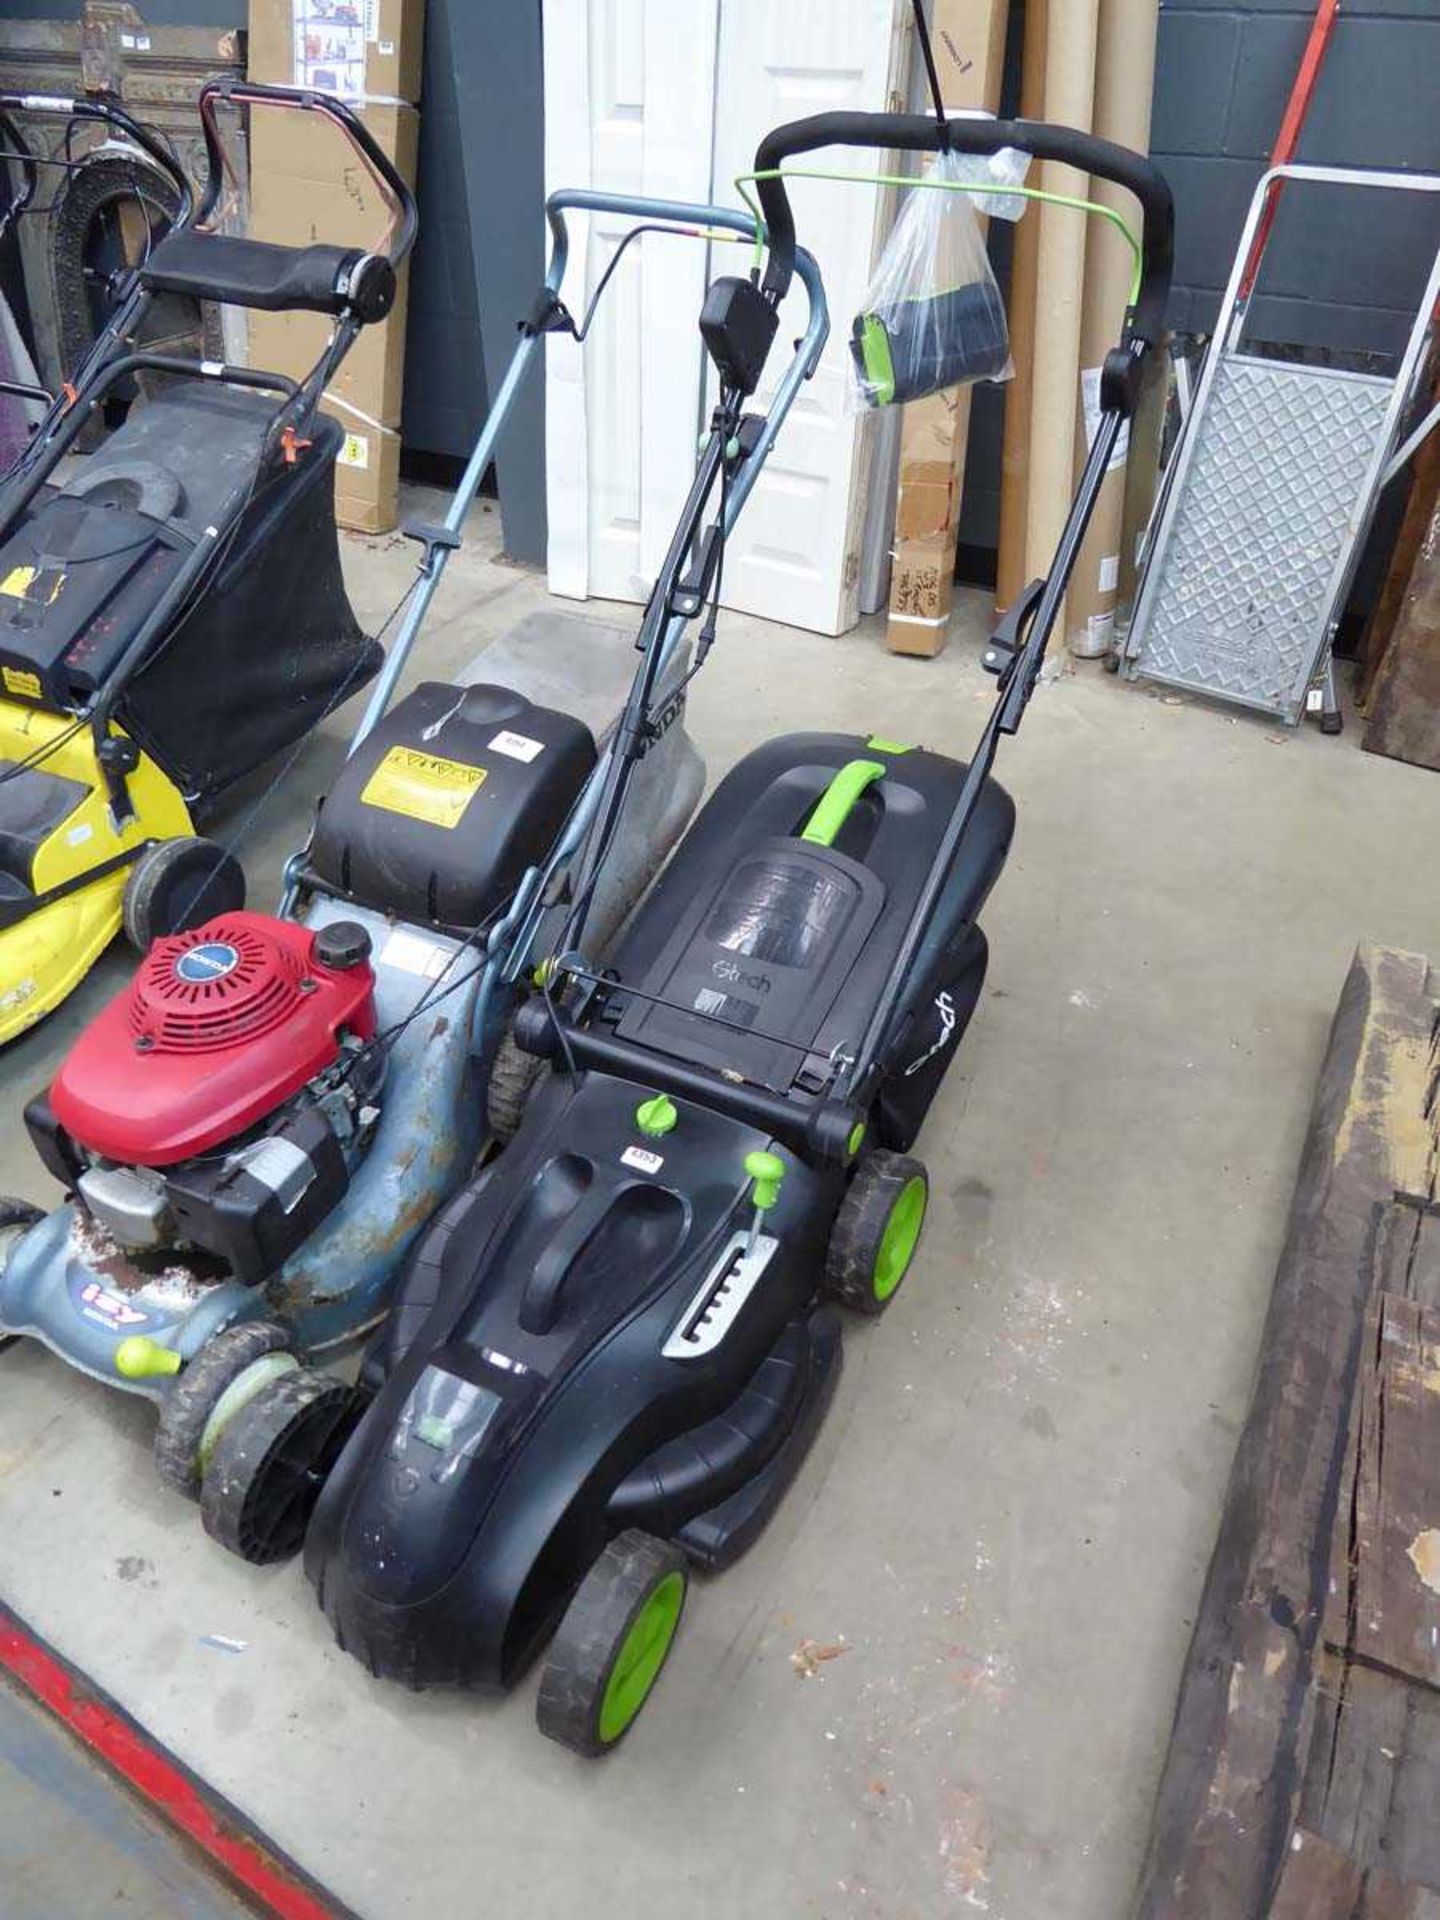 GTech battery powered mower with battery, no charger